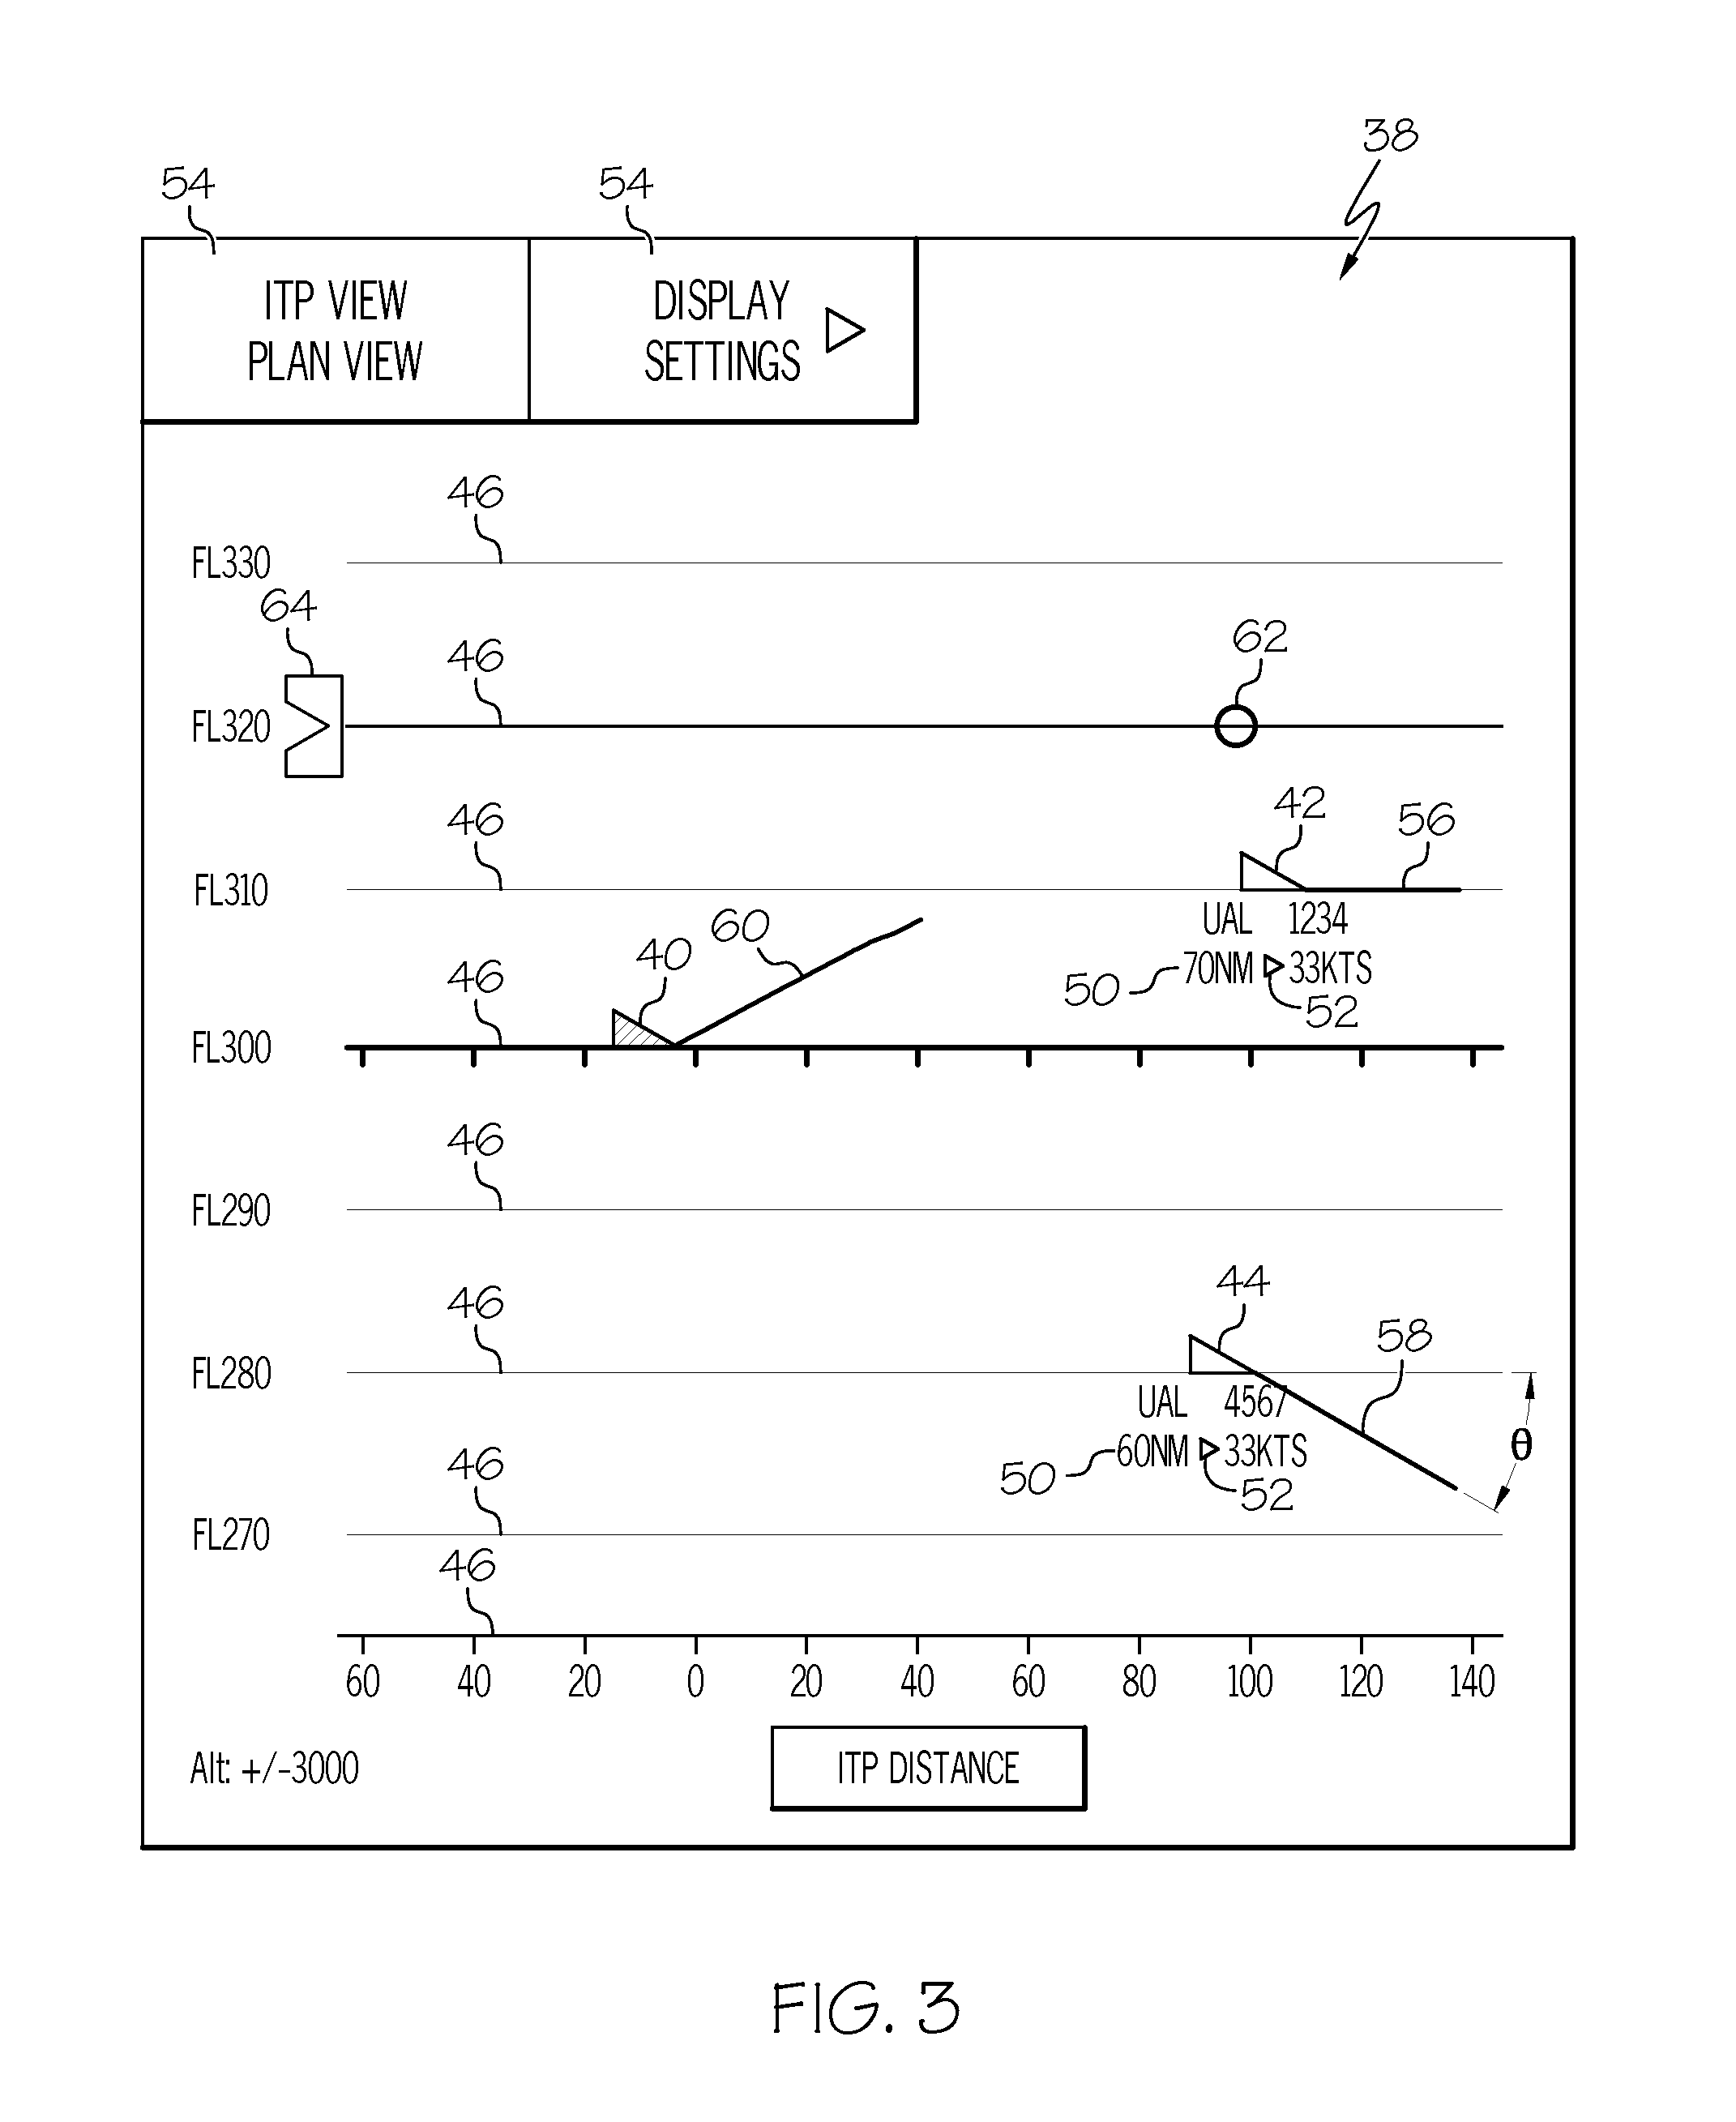 Flight deck display systems and methods for generating in-trail procedure windows including aircraft flight path symbology